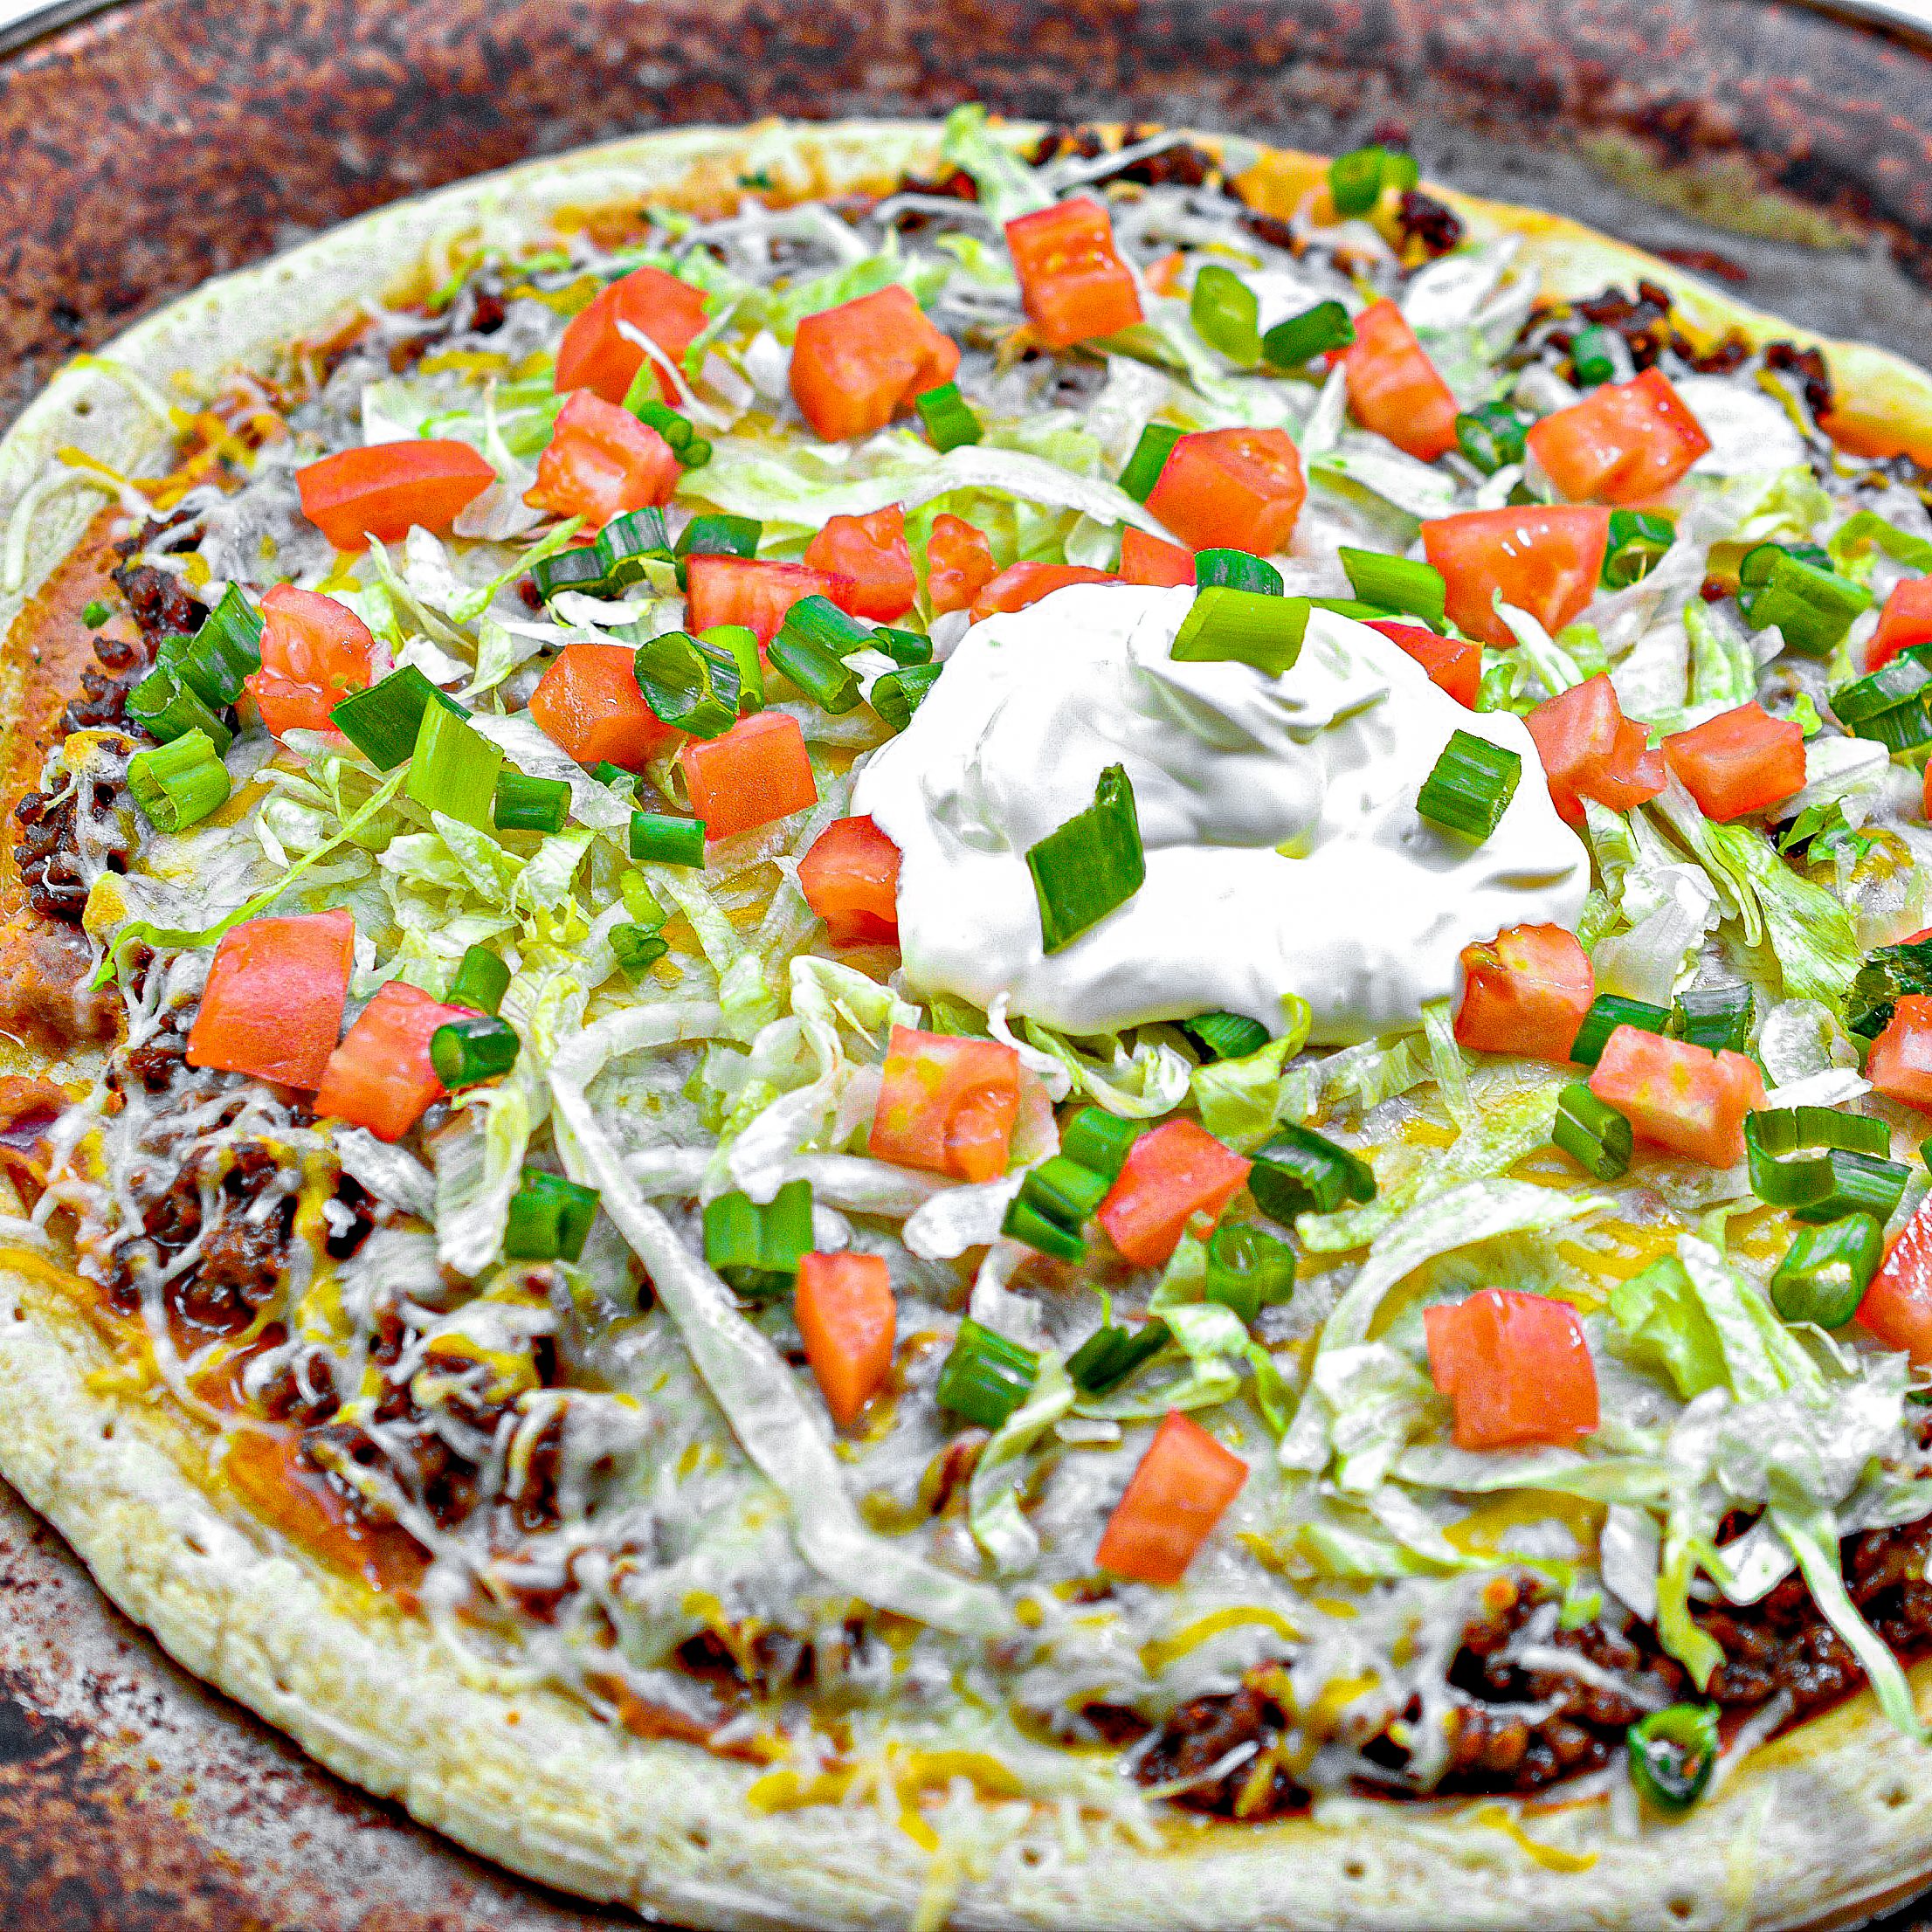 Top the pizza with the shredded lettuce, tomatoes, green onions, sour cream, and any other toppings you may desire before serving.